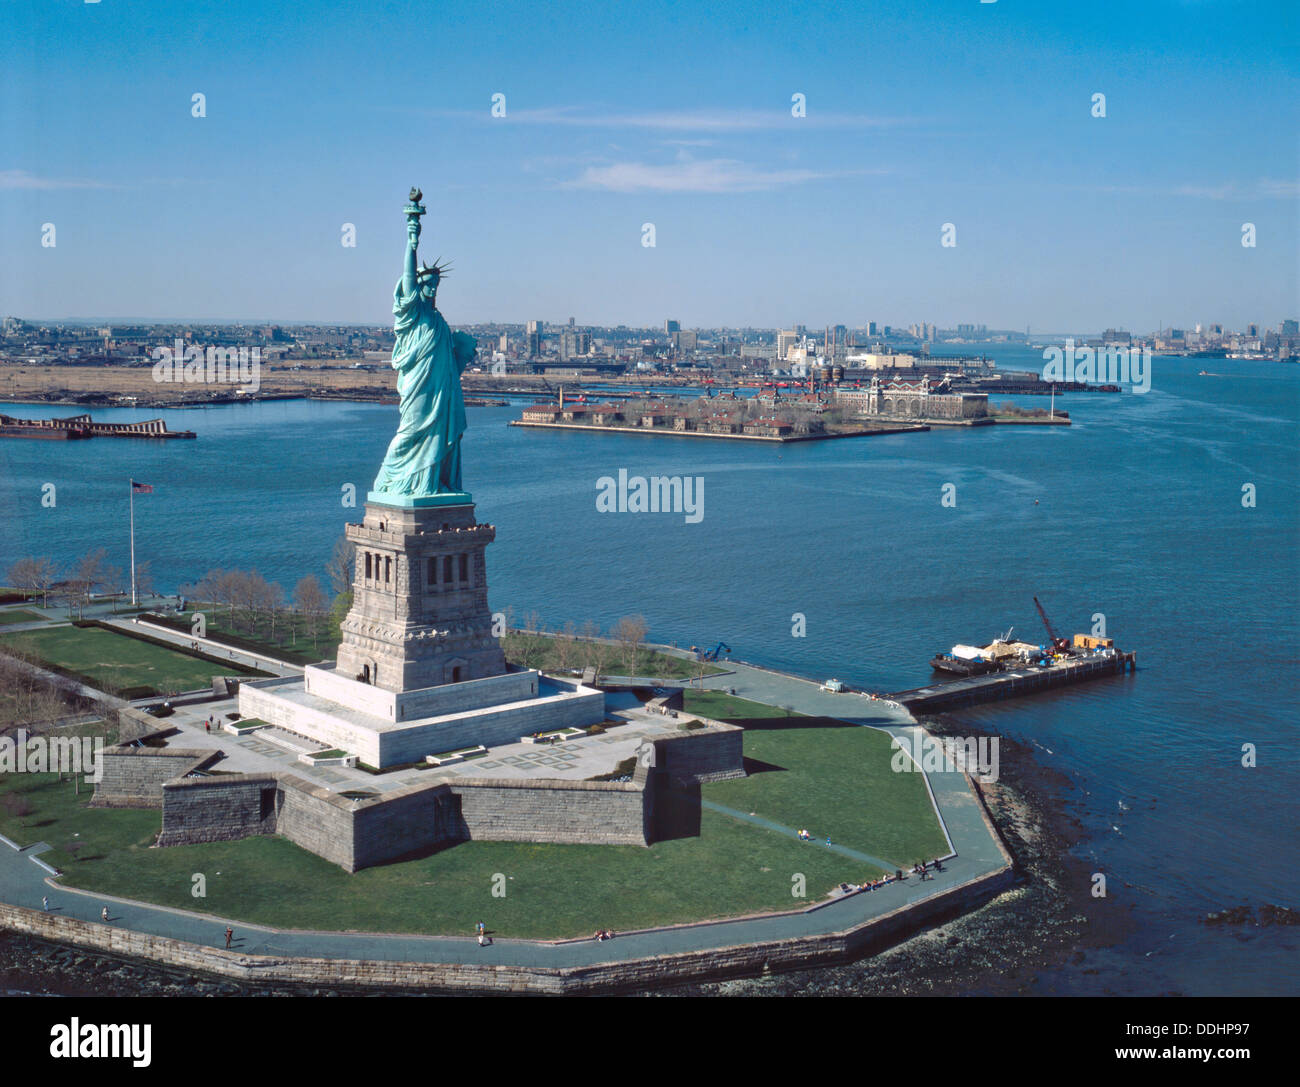 Aerial view of the Statue of Liberty 